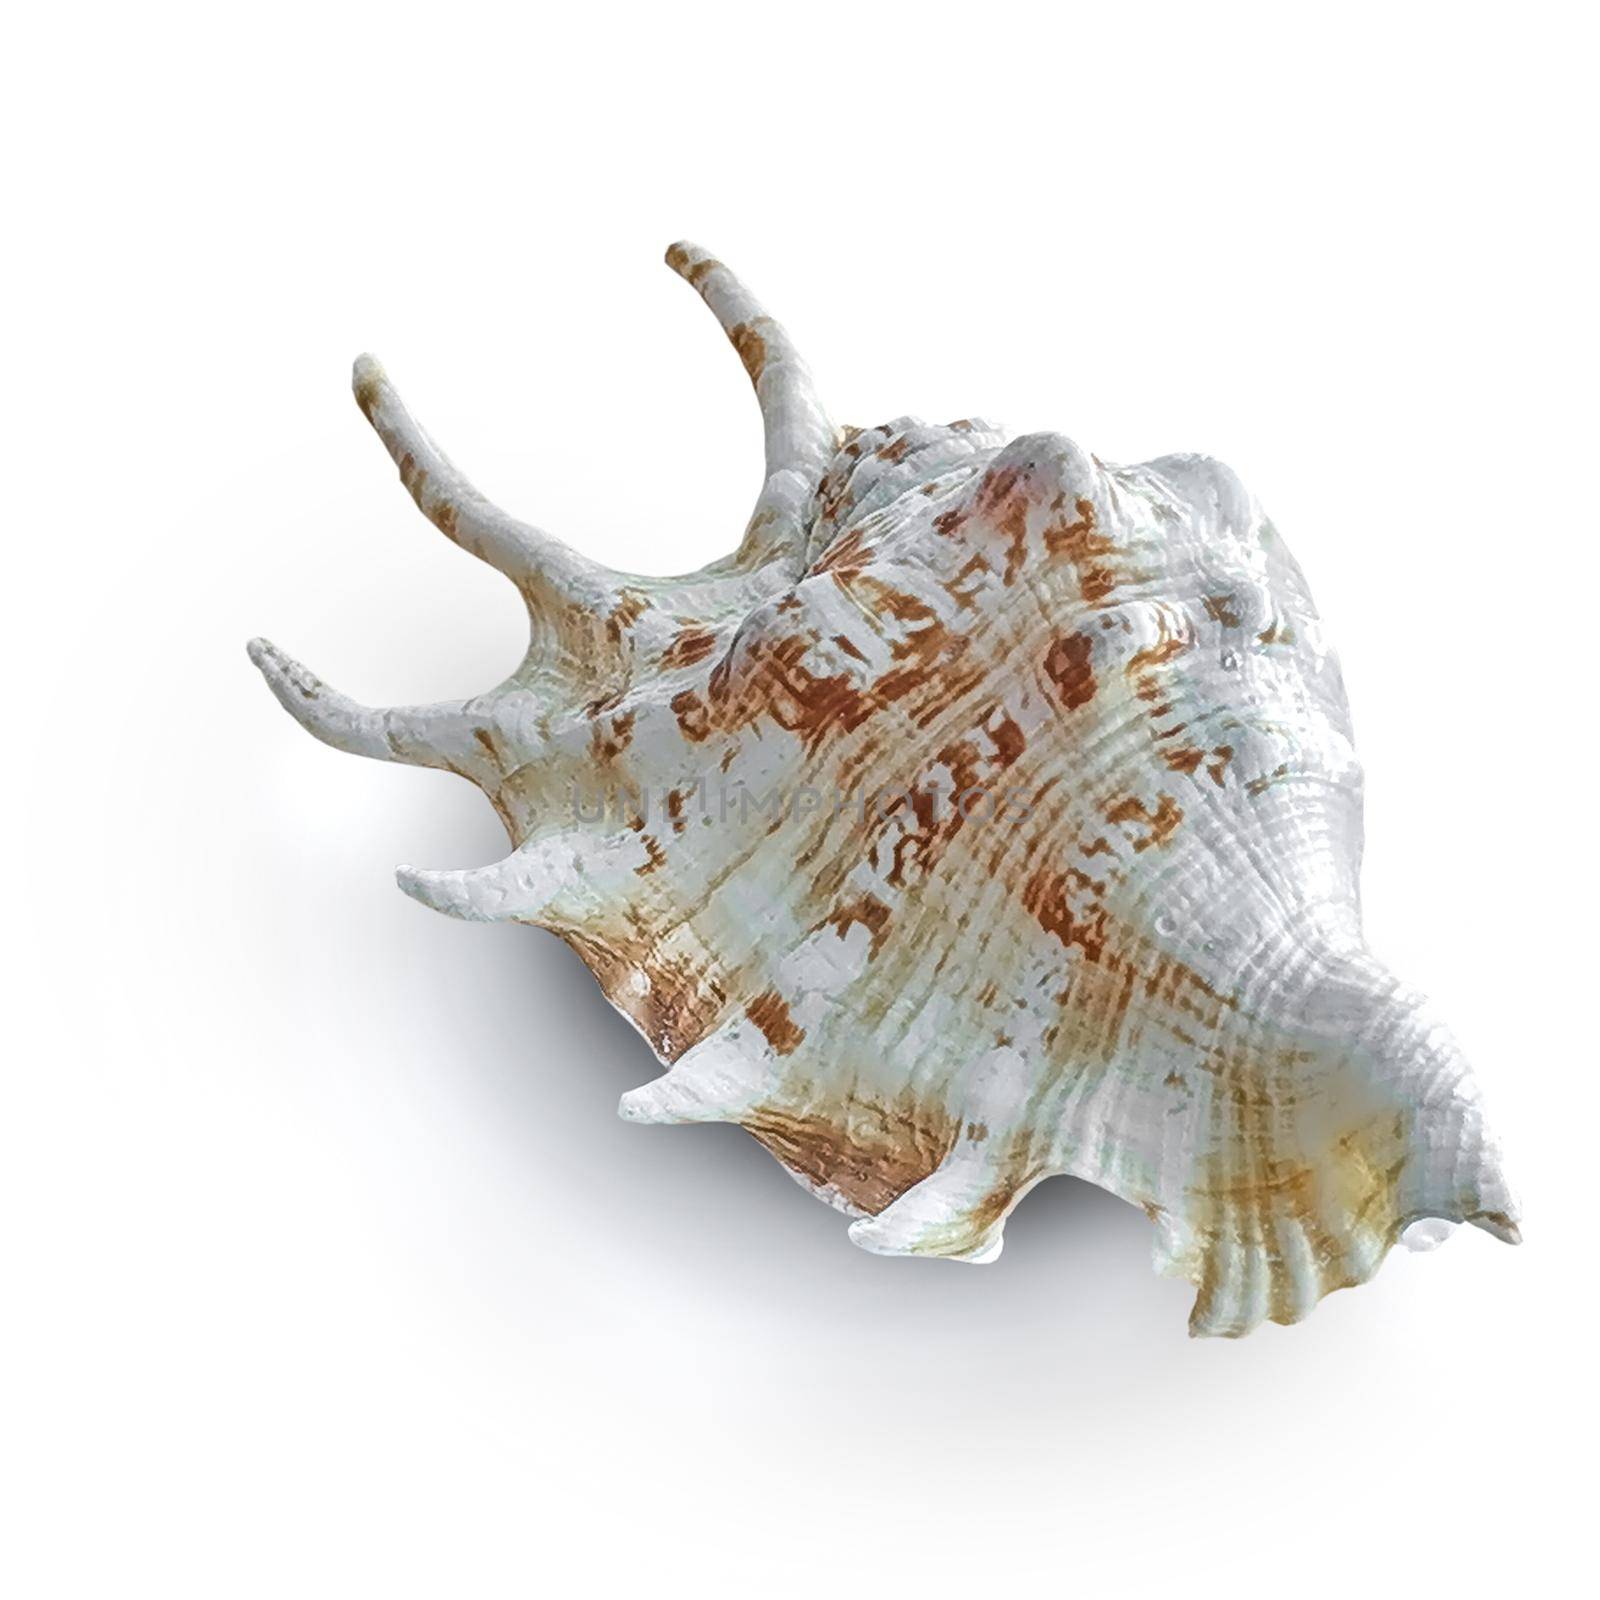 Beautiful sea shell . Presented on a white background. by georgina198